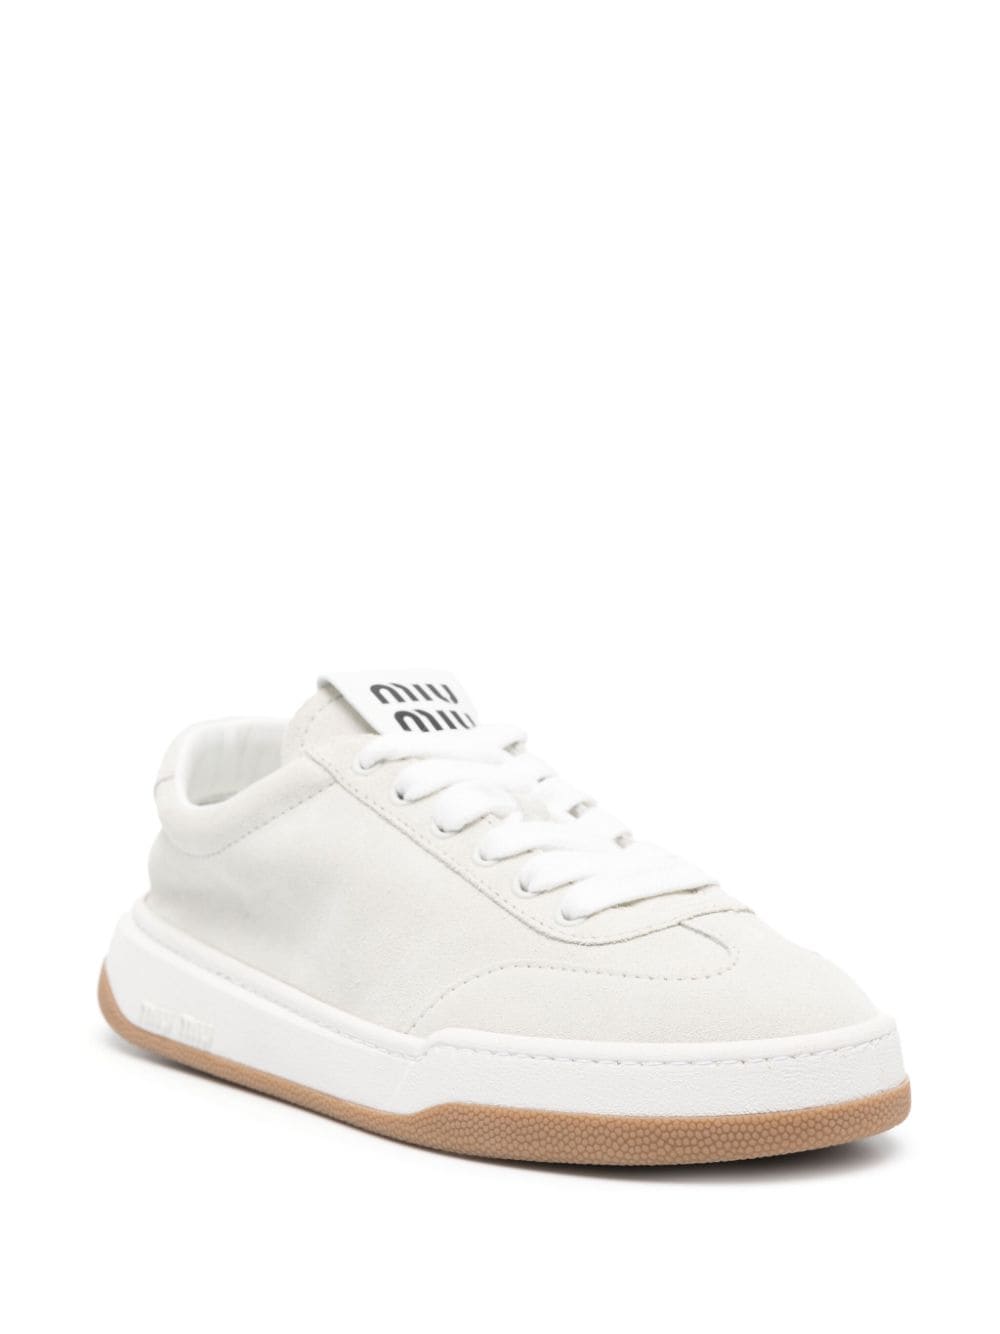 Logo-patch suede sneakers<BR/><BR/><BR/><BR/><BR/><BR/>